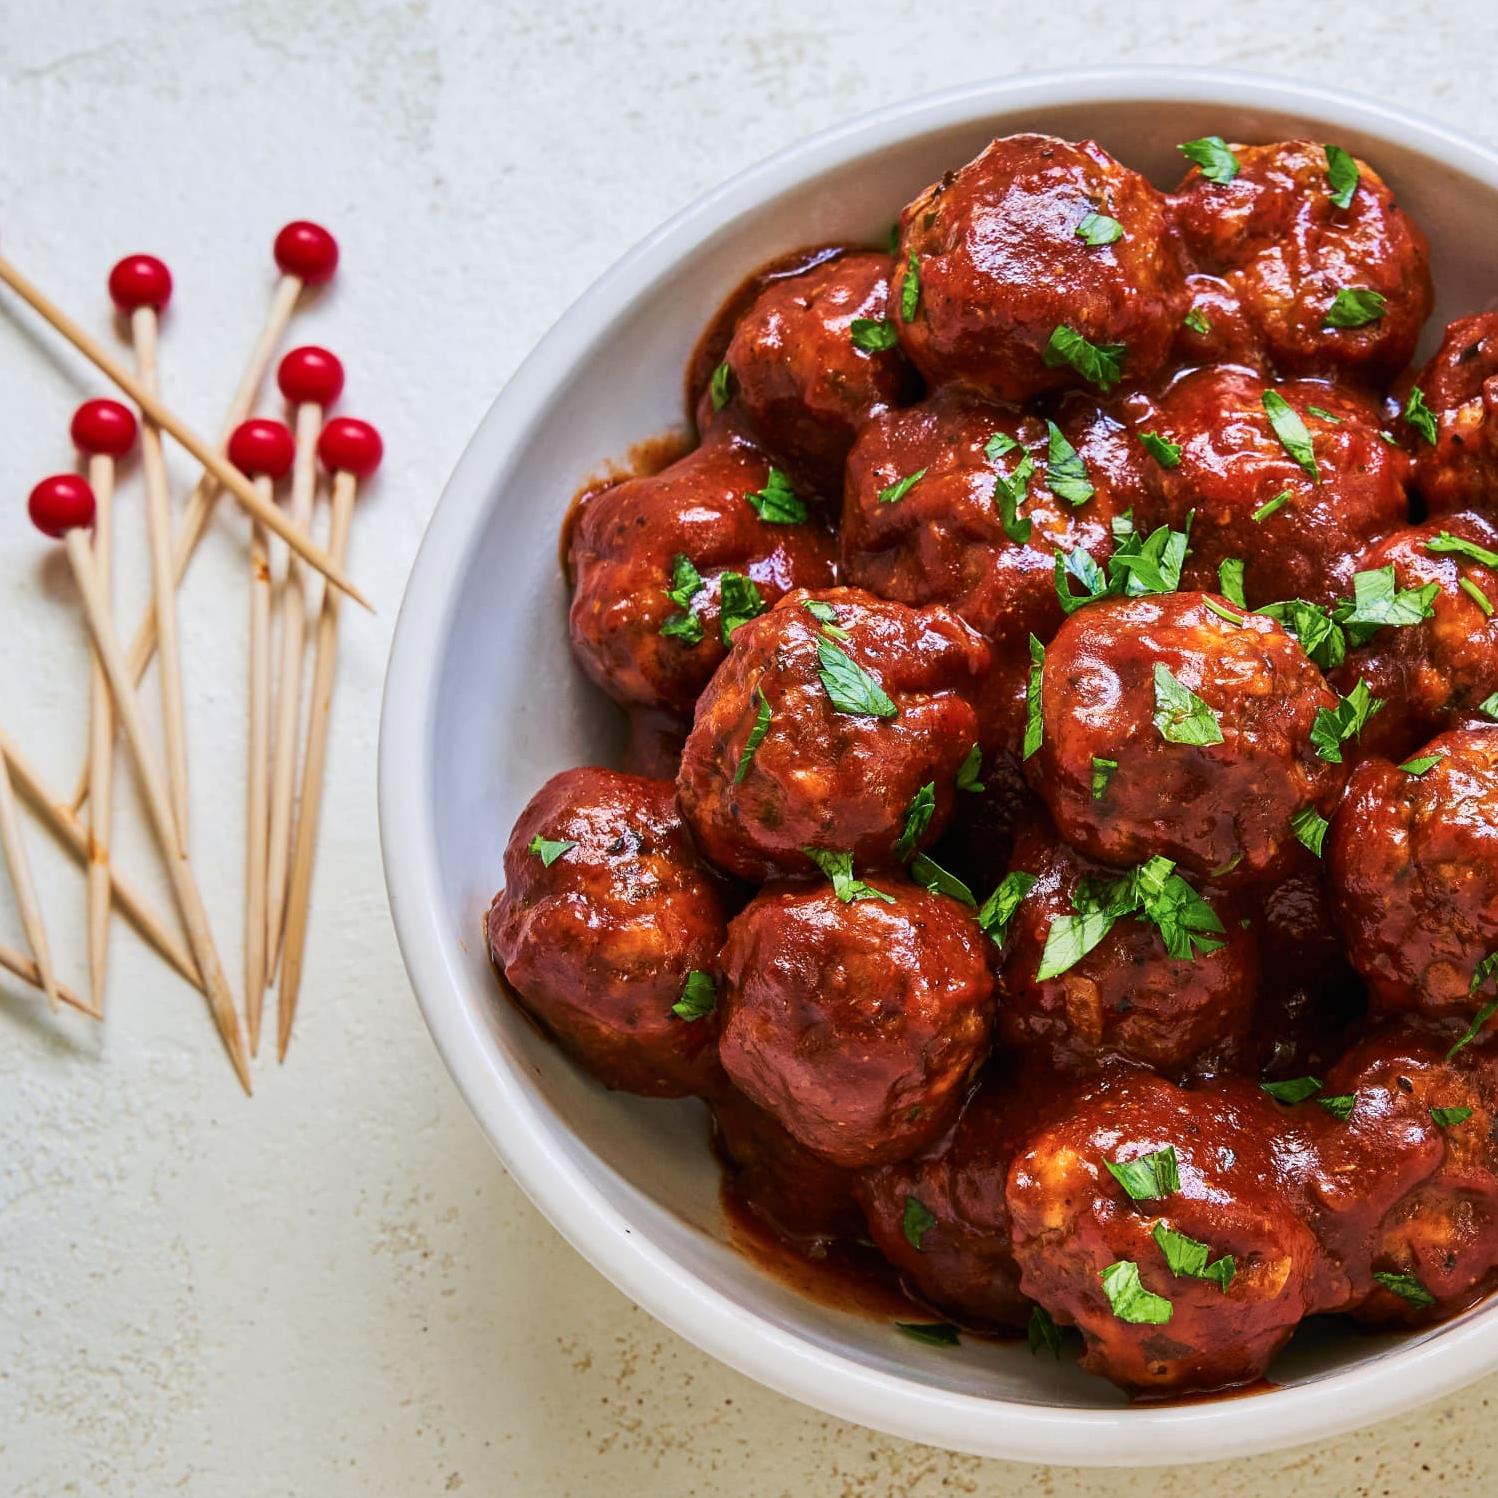  Make sure to grab a napkin because these juicy, flavorful meatballs are finger-lickin' good.